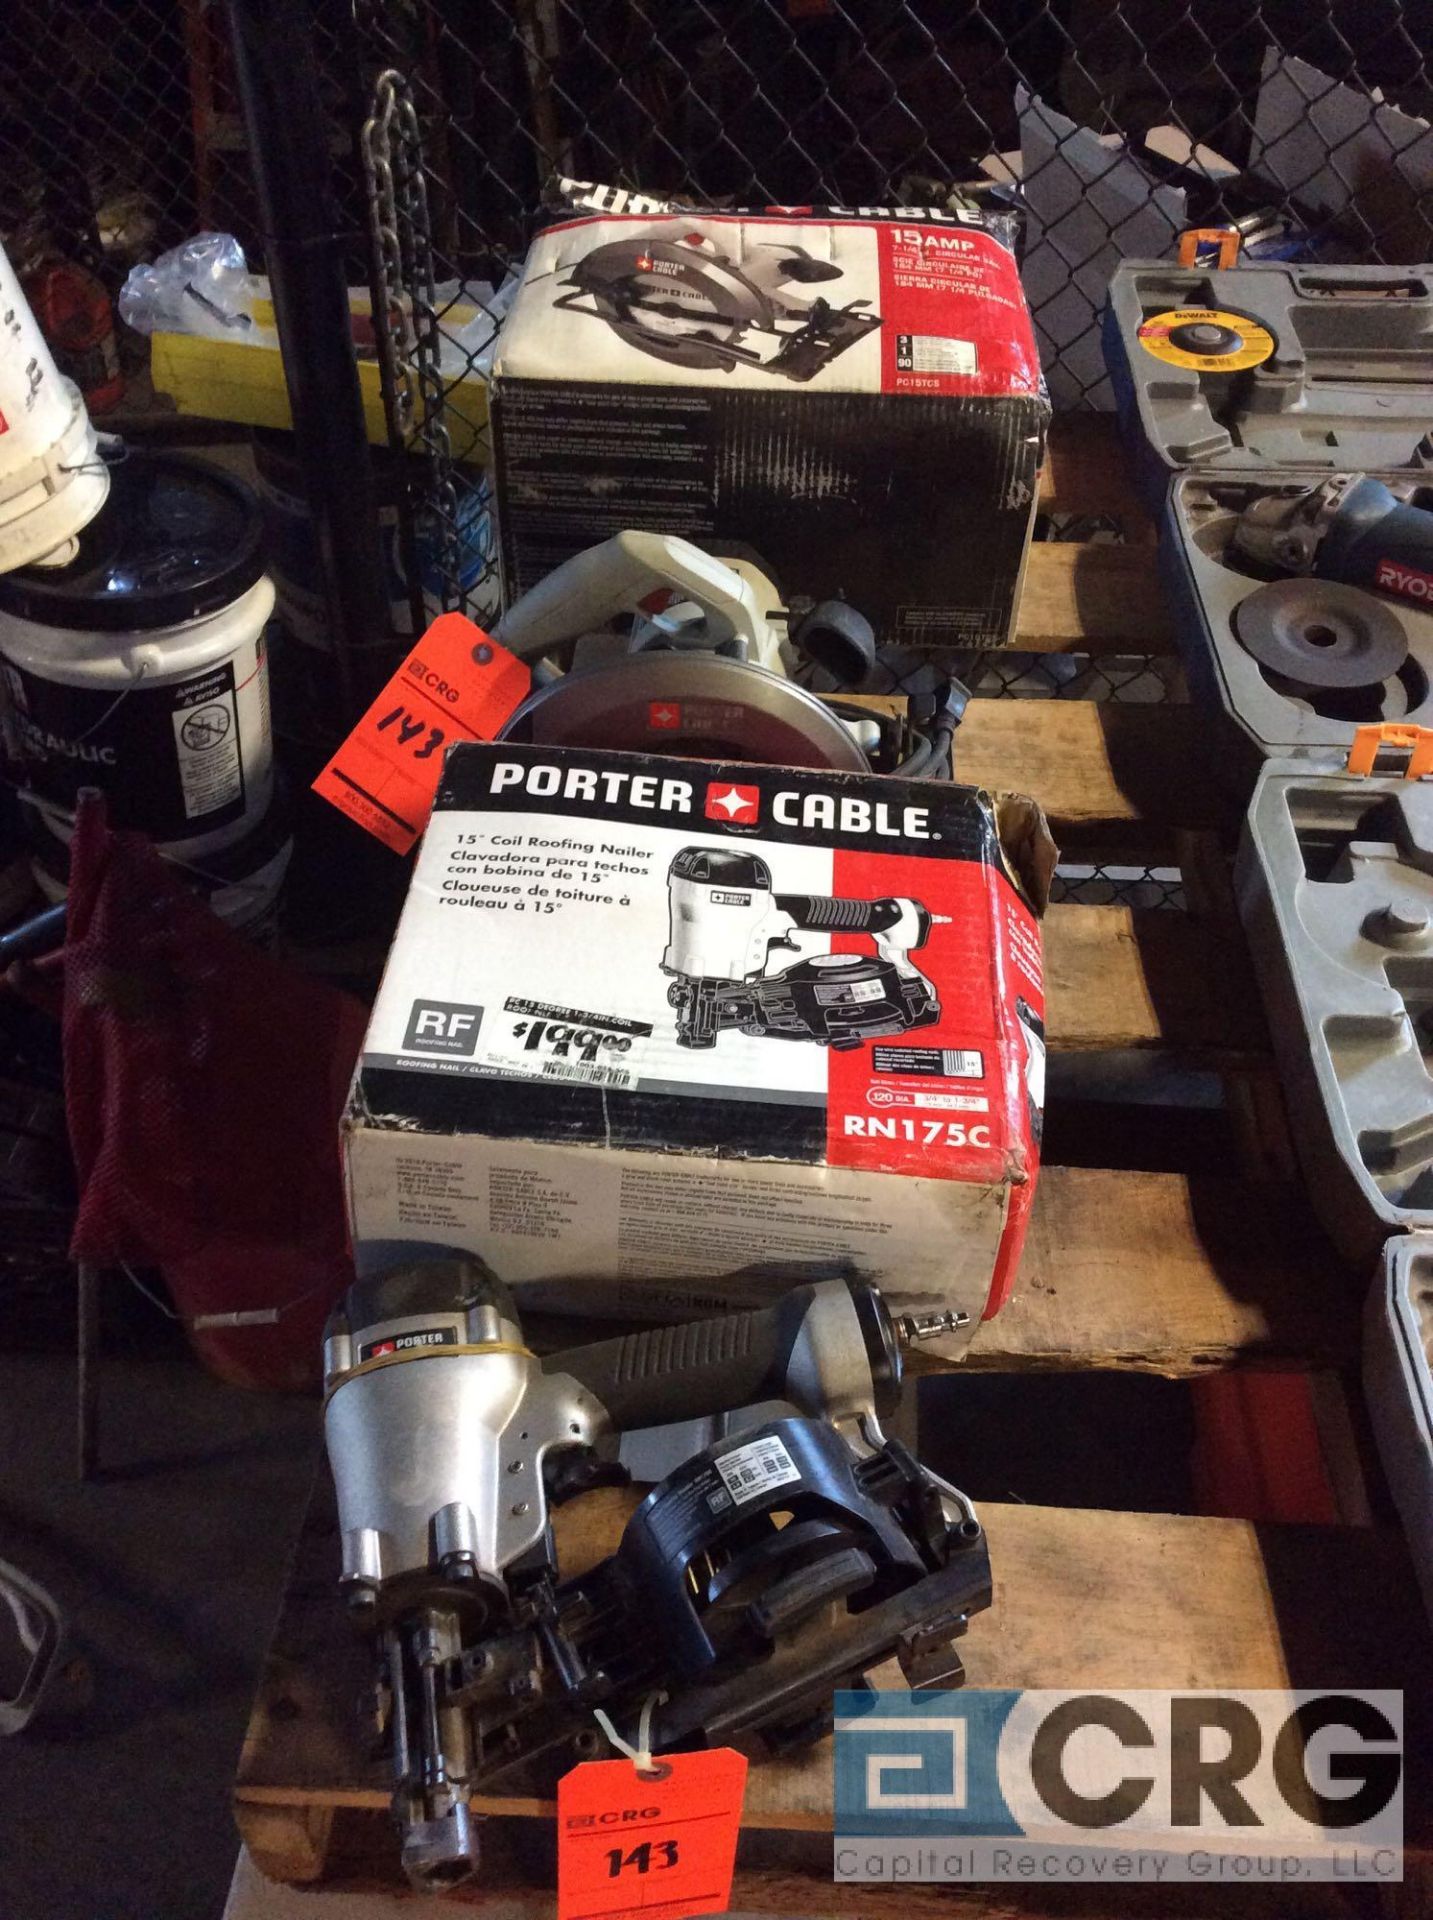 Lot f (2) Porter Cable handtools including 15 degree pneumatic coil roofing nailer and 7 1/4 inch